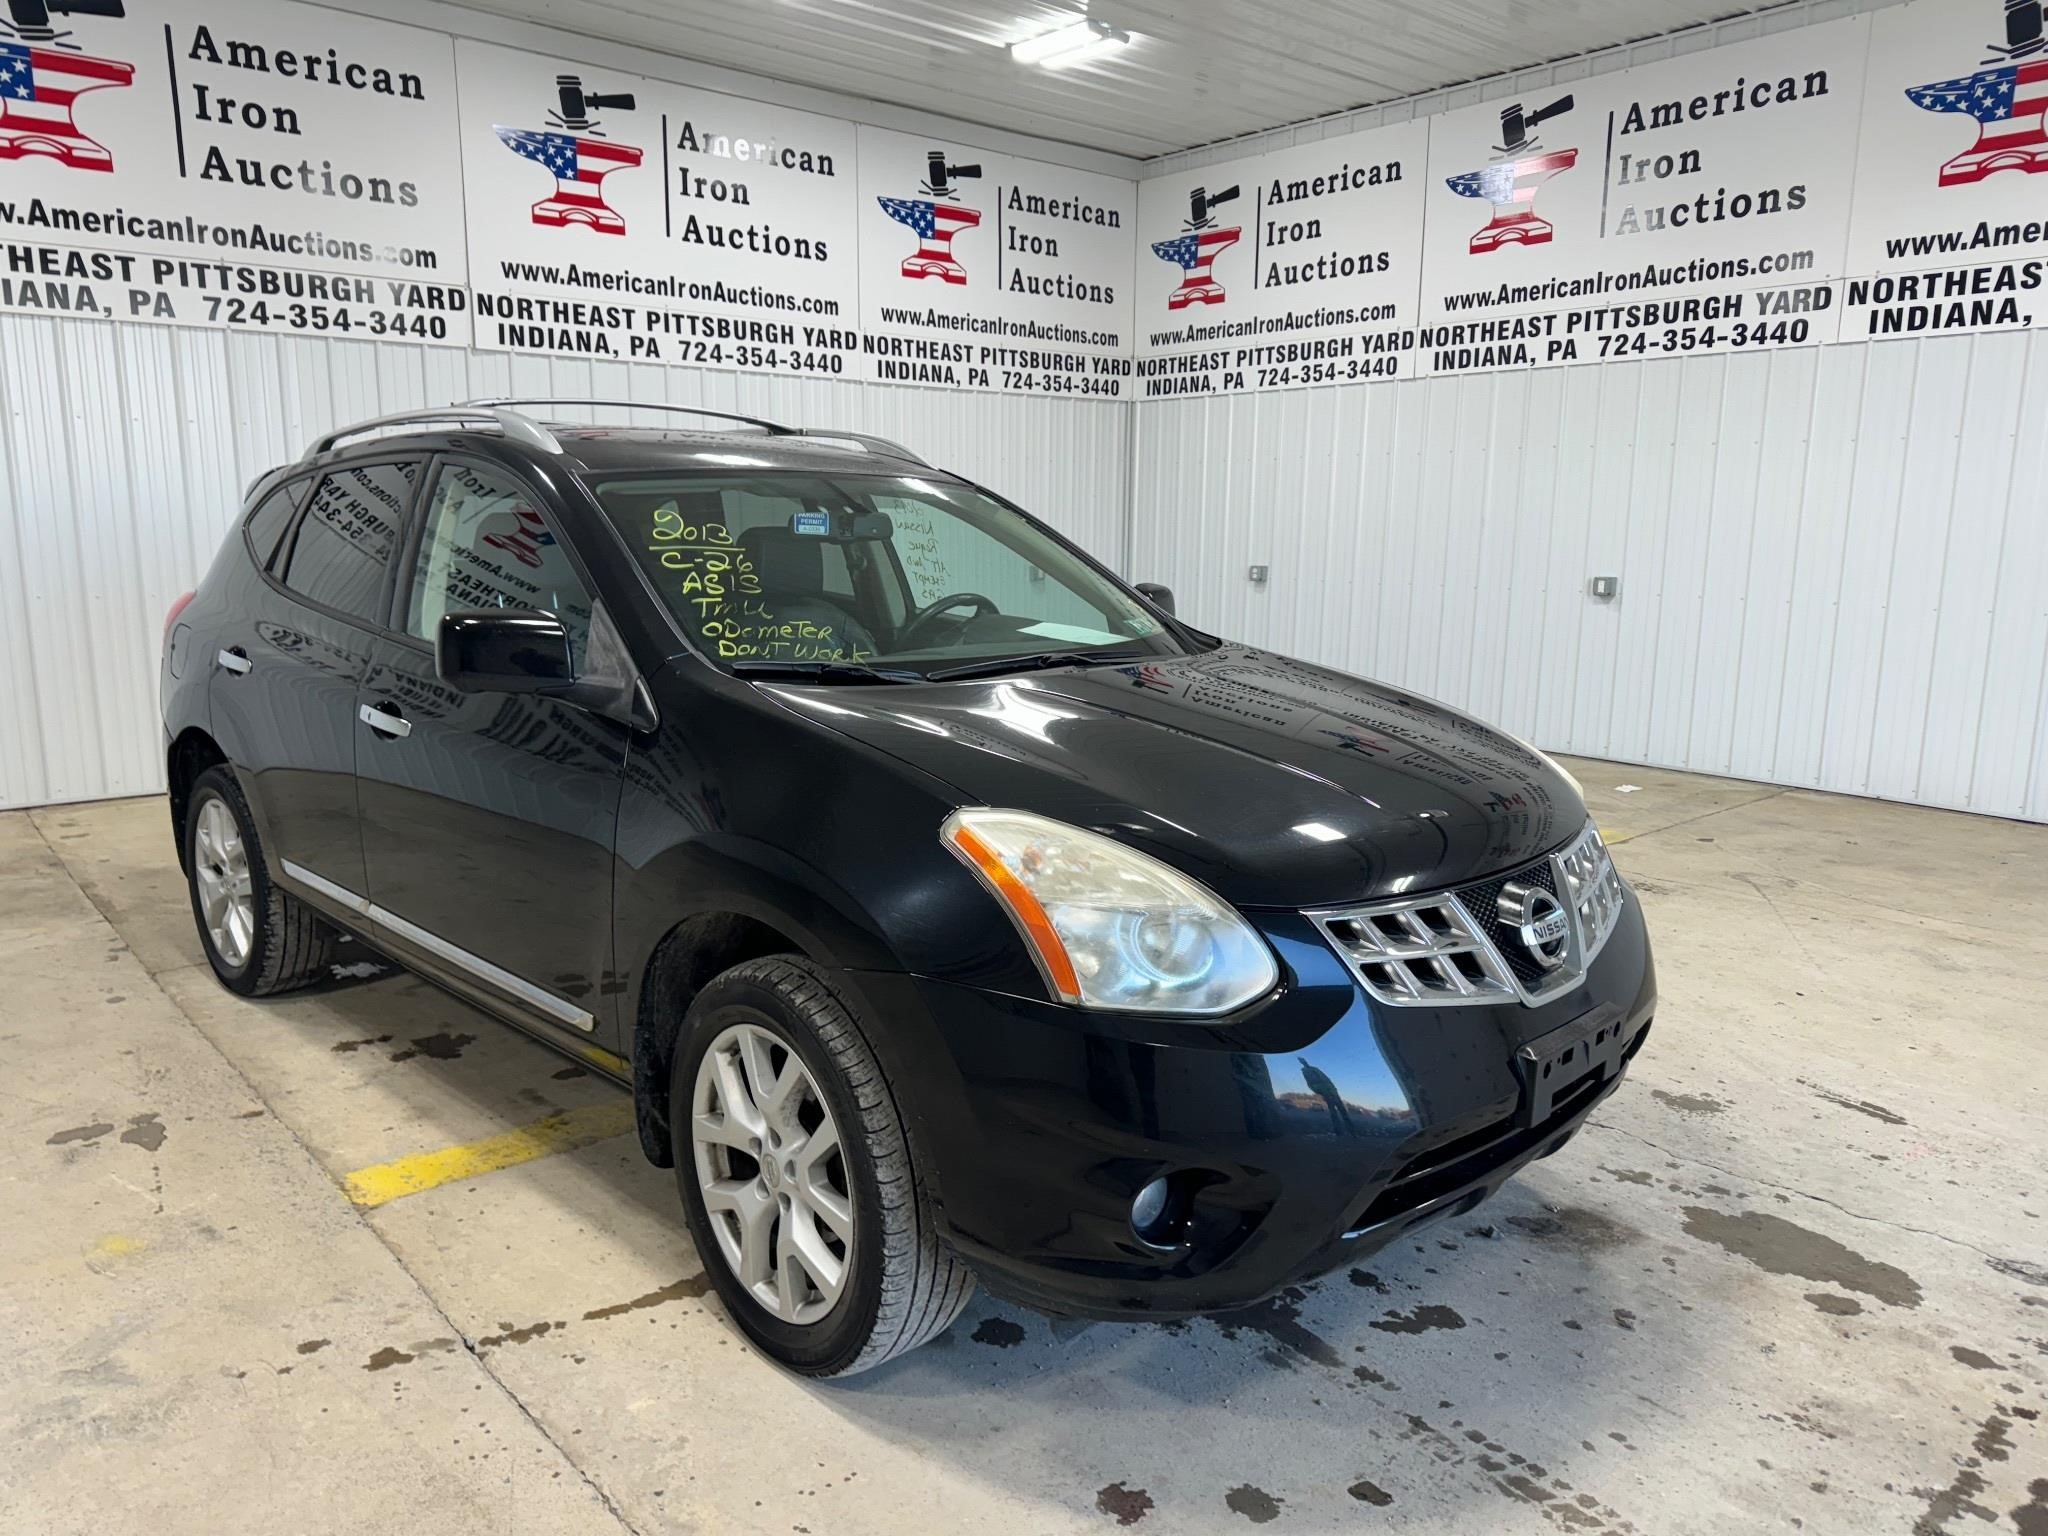 2013 Nissan Rogue SUV -Titled-NO RESERVE